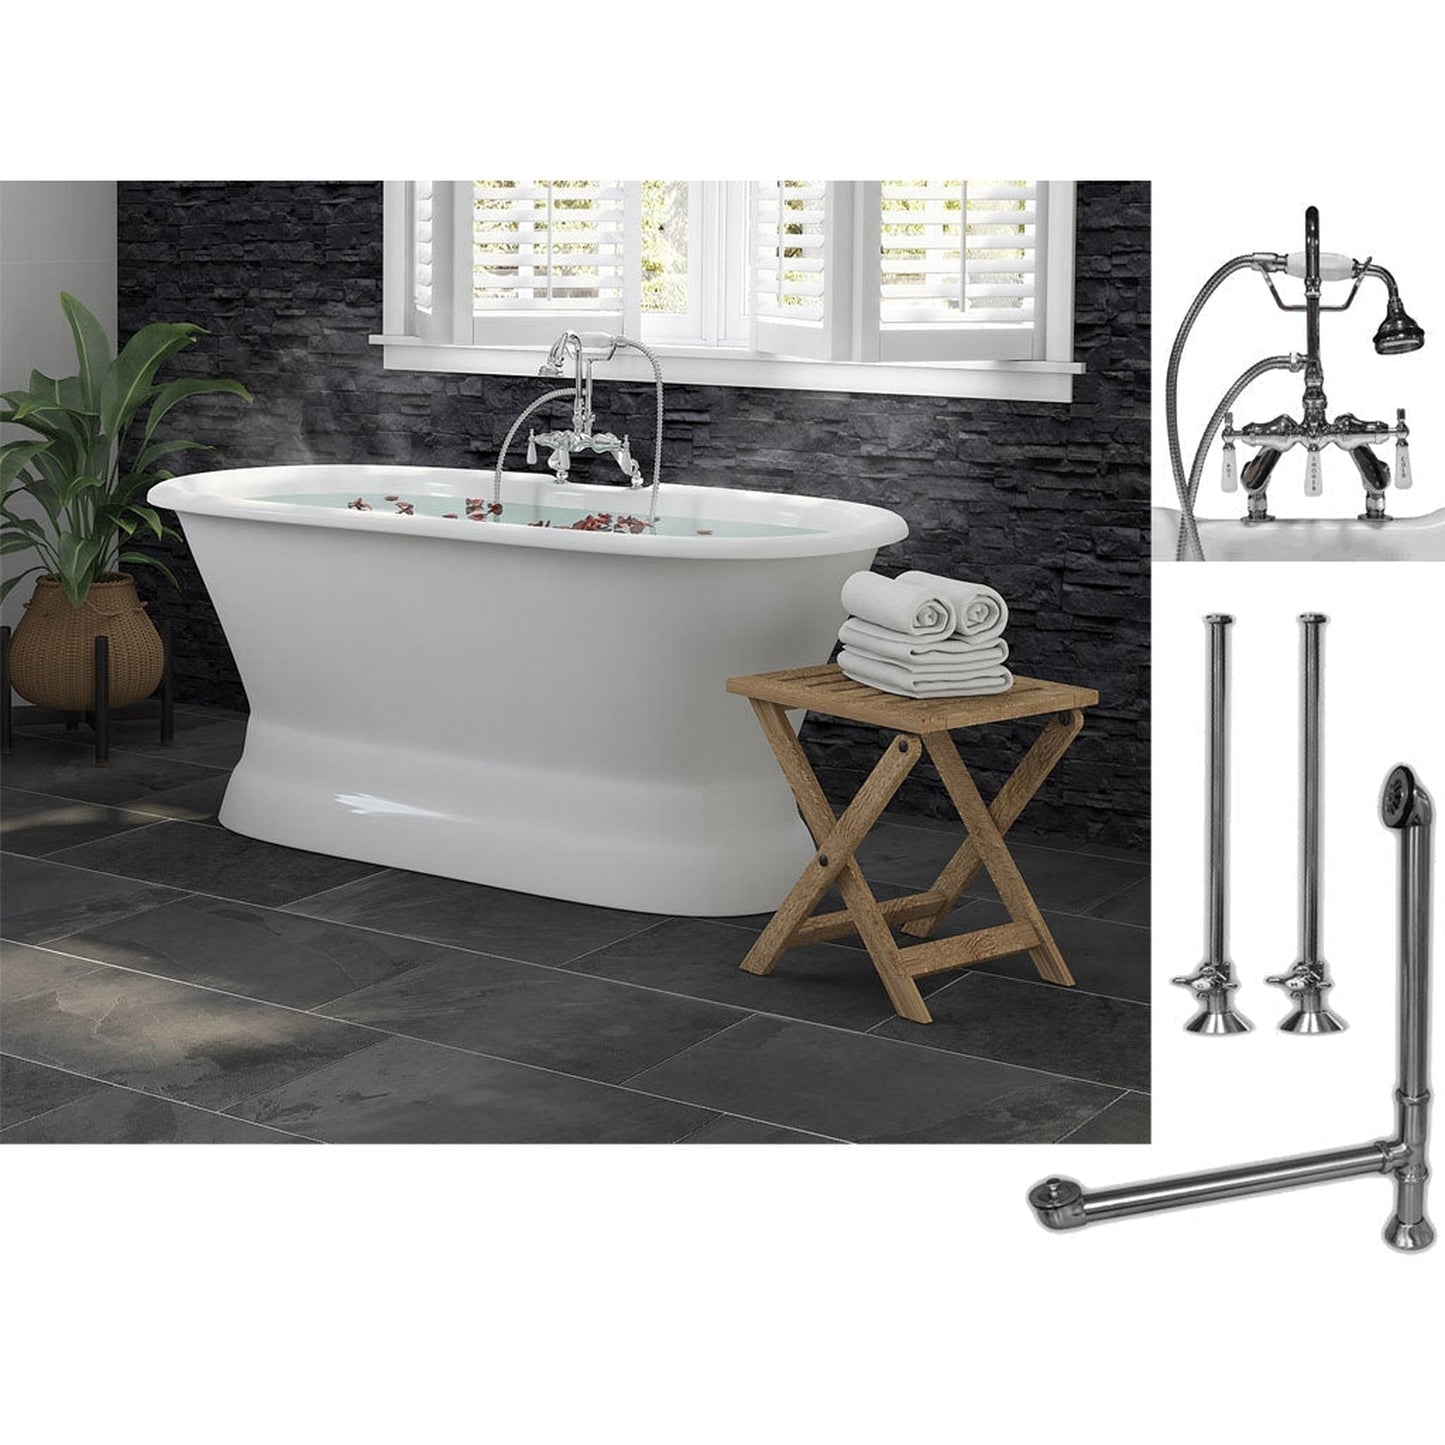 Cambridge Plumbing 66" White Cast Iron Double Ended Pedestal Bathtub With Deck Holes And Complete Plumbing Package Including Porcelain Lever English Telephone Brass Faucet, Supply Lines, Drain And Overflow Assembly In Polished Chrome